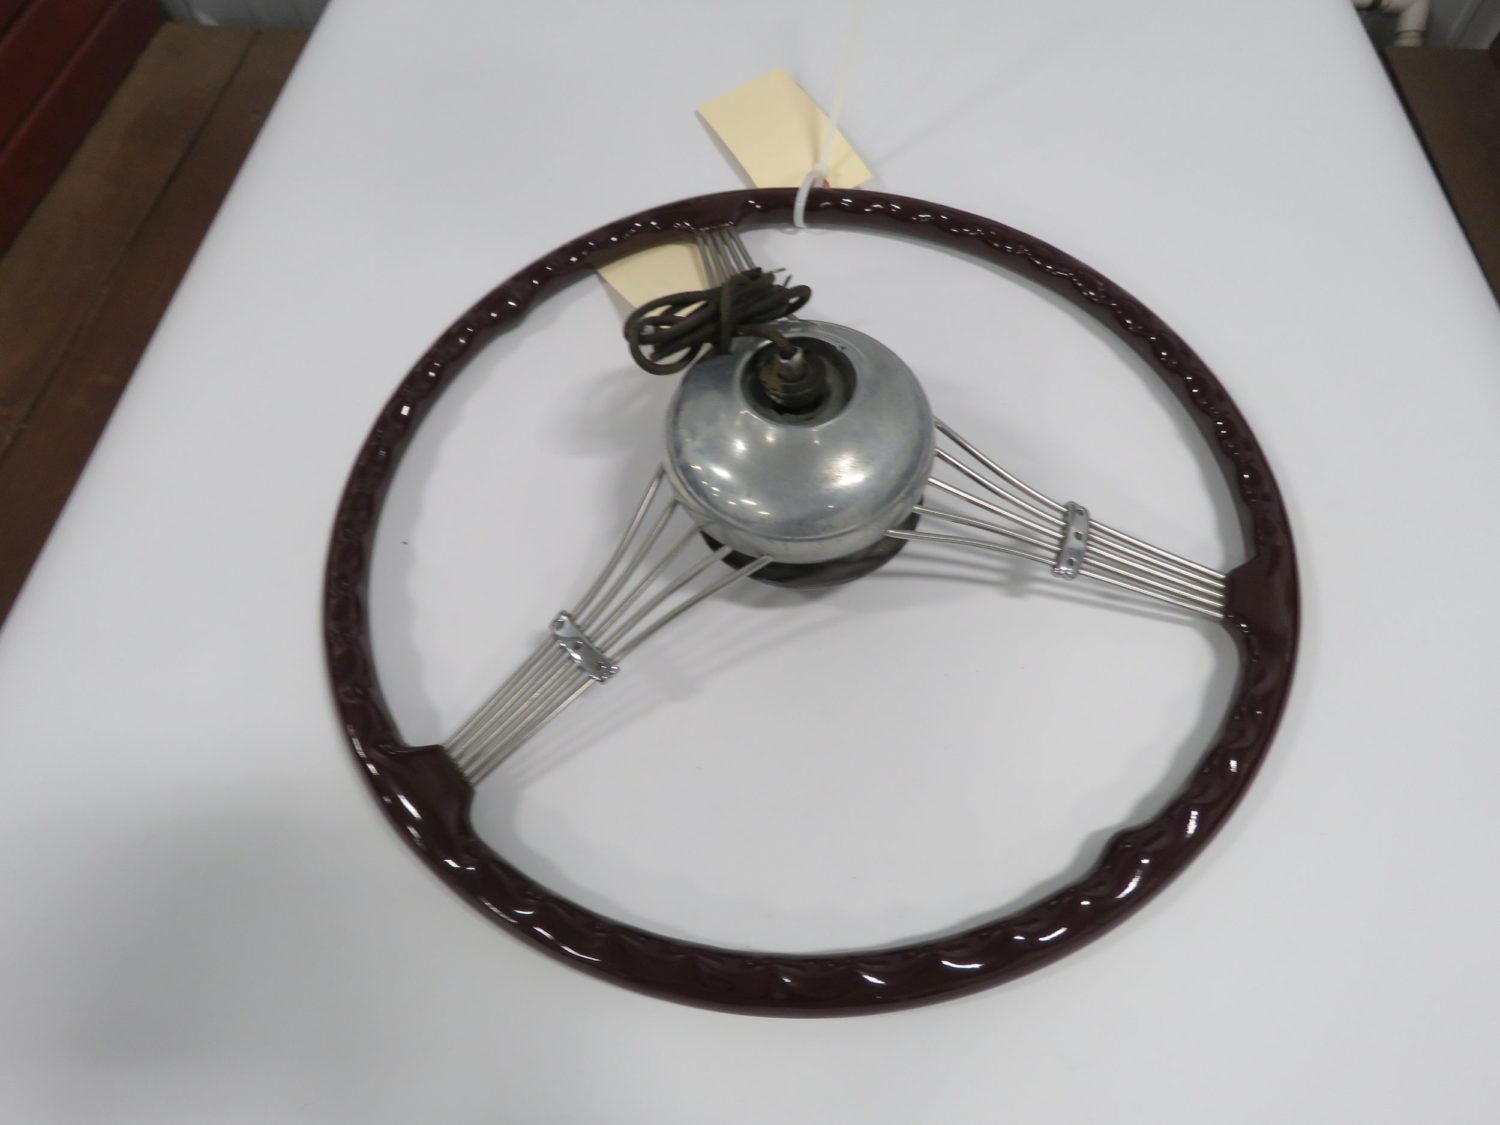 1938 Ford Banjo Steering wheel w/Horn Button Restored - Image 2